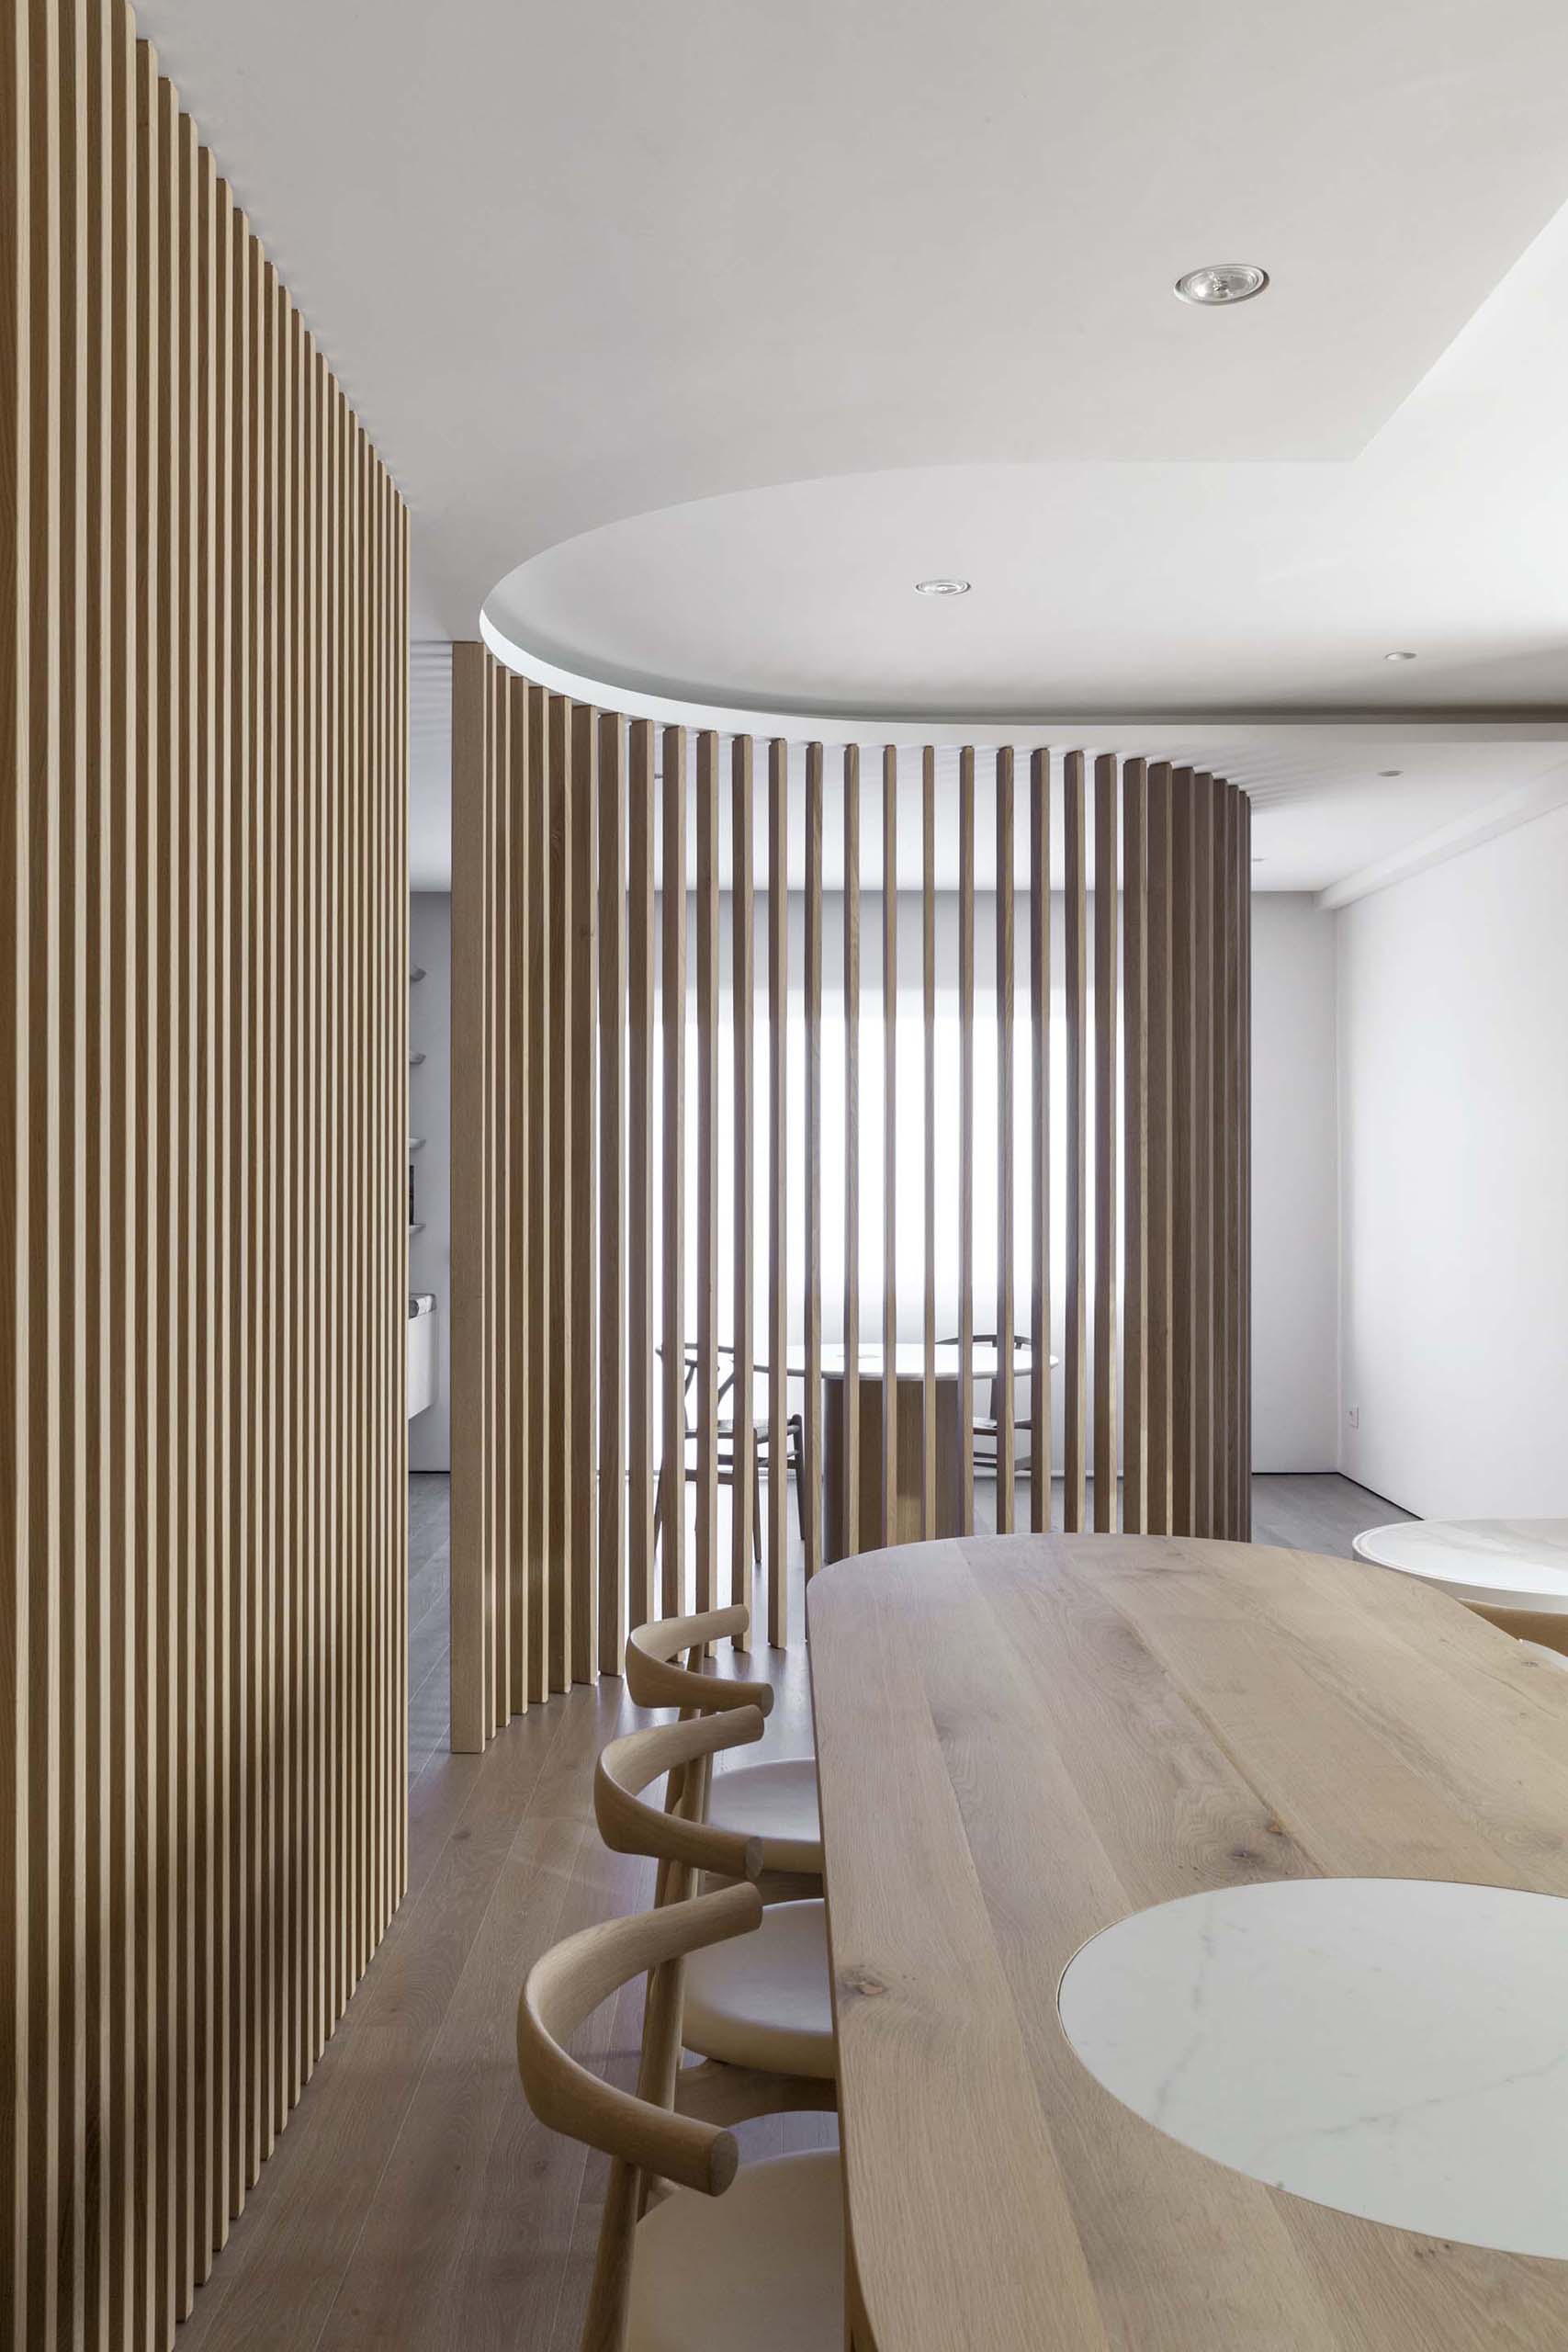 Curved oak partitions separate various zones of the interior in this apartment.